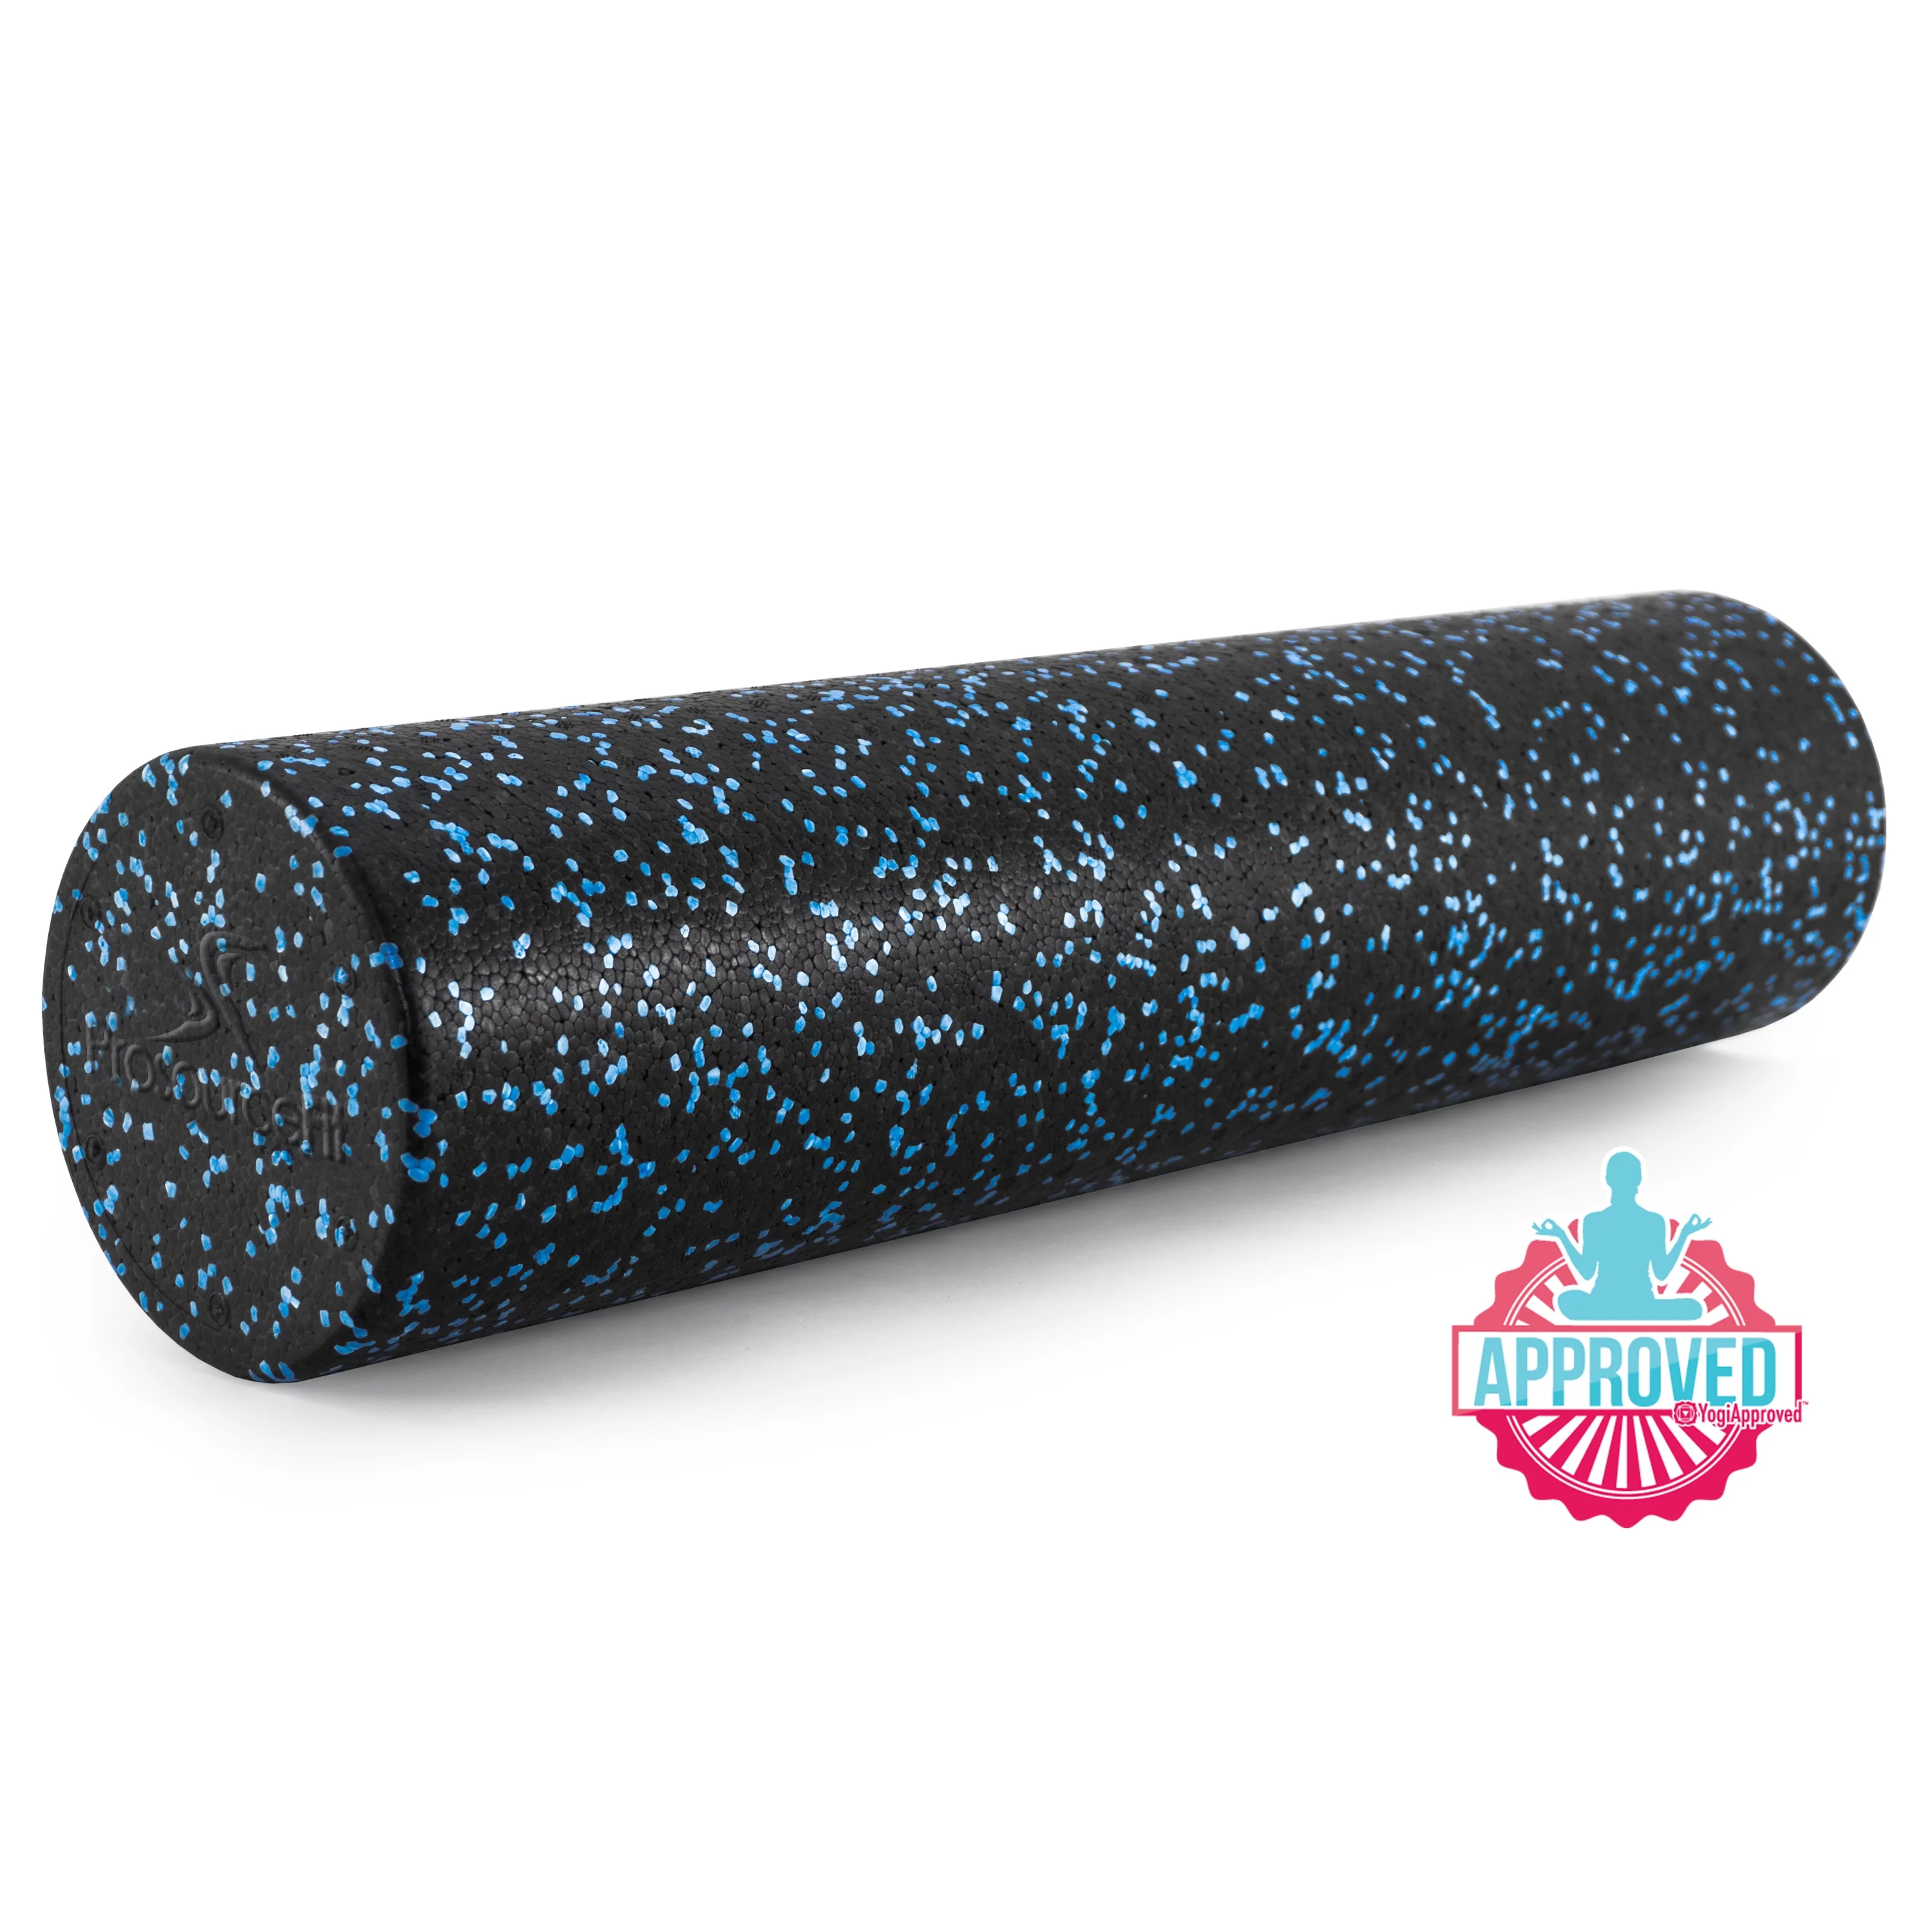 Prosourcefit High Density Speckled Black Foam Roller for Myofascial Release, Trigger Point Massage and Muscle Therapy